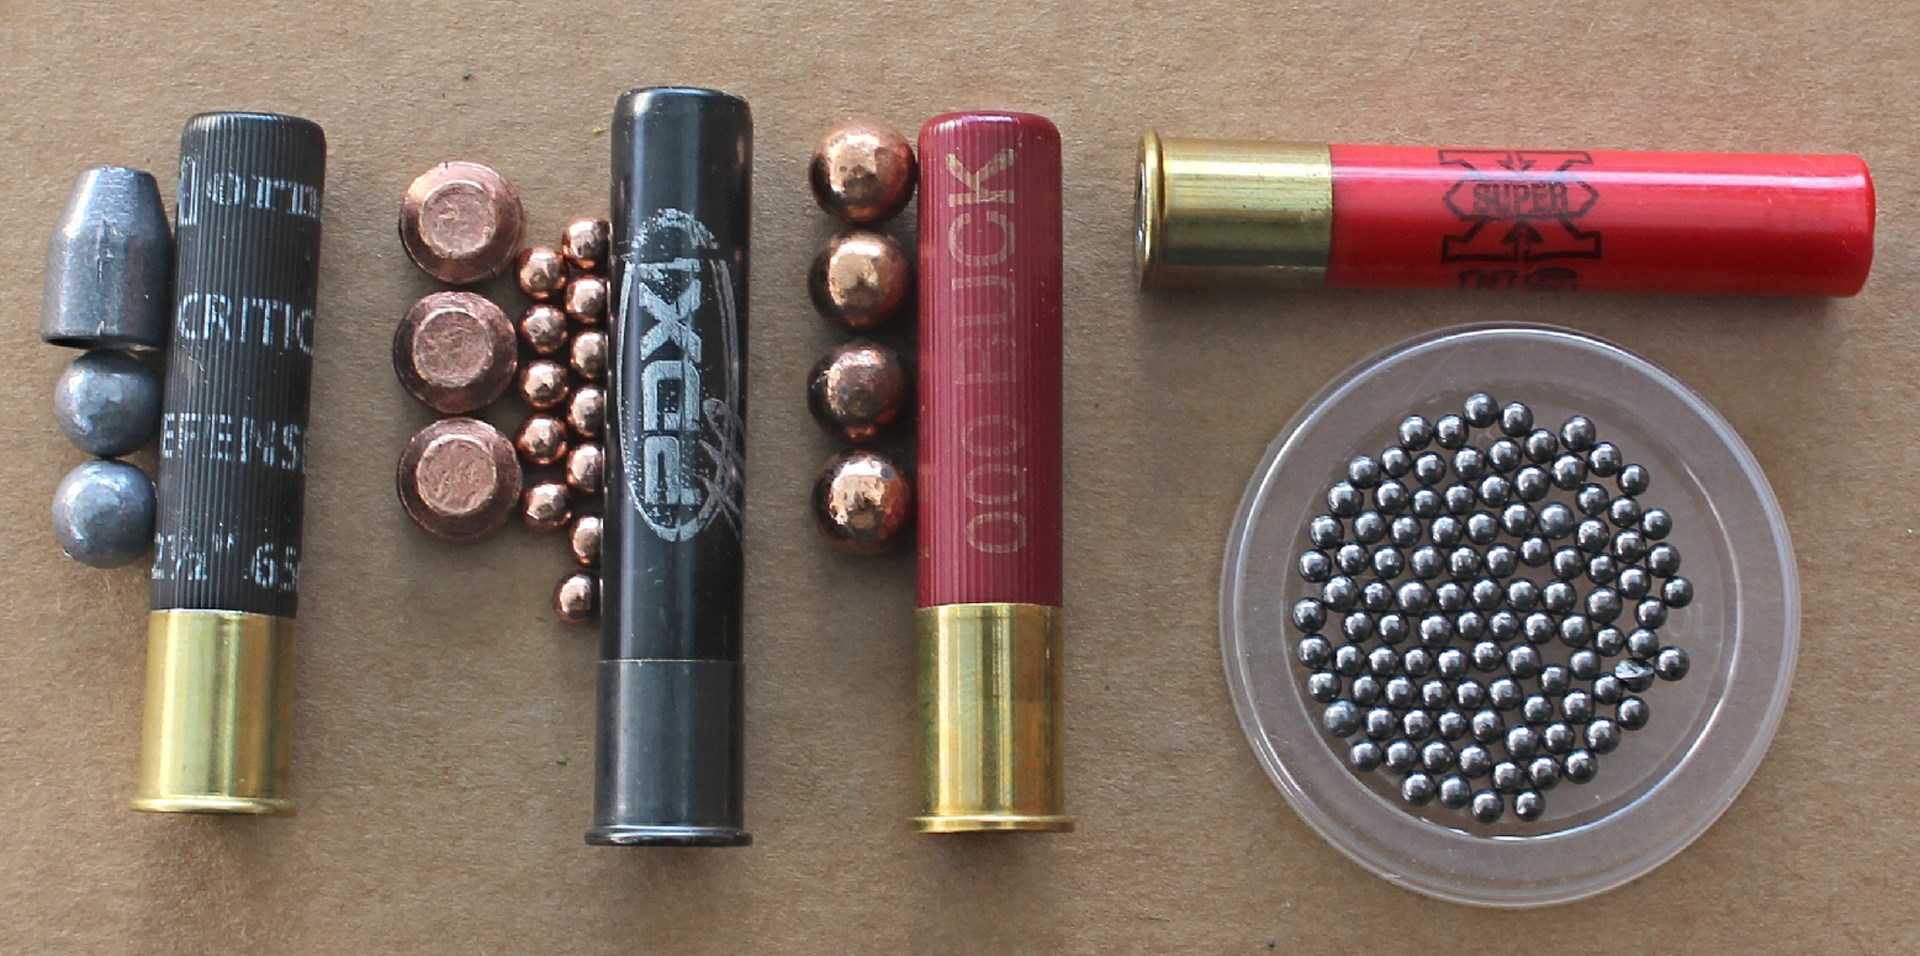 Three vertical and one horizontal shotshells on brown paper ammunition The popularity of the Taurus Judge inspired the development of mixed payload shot shells in addition to traditional buckshot and birdshot loads.